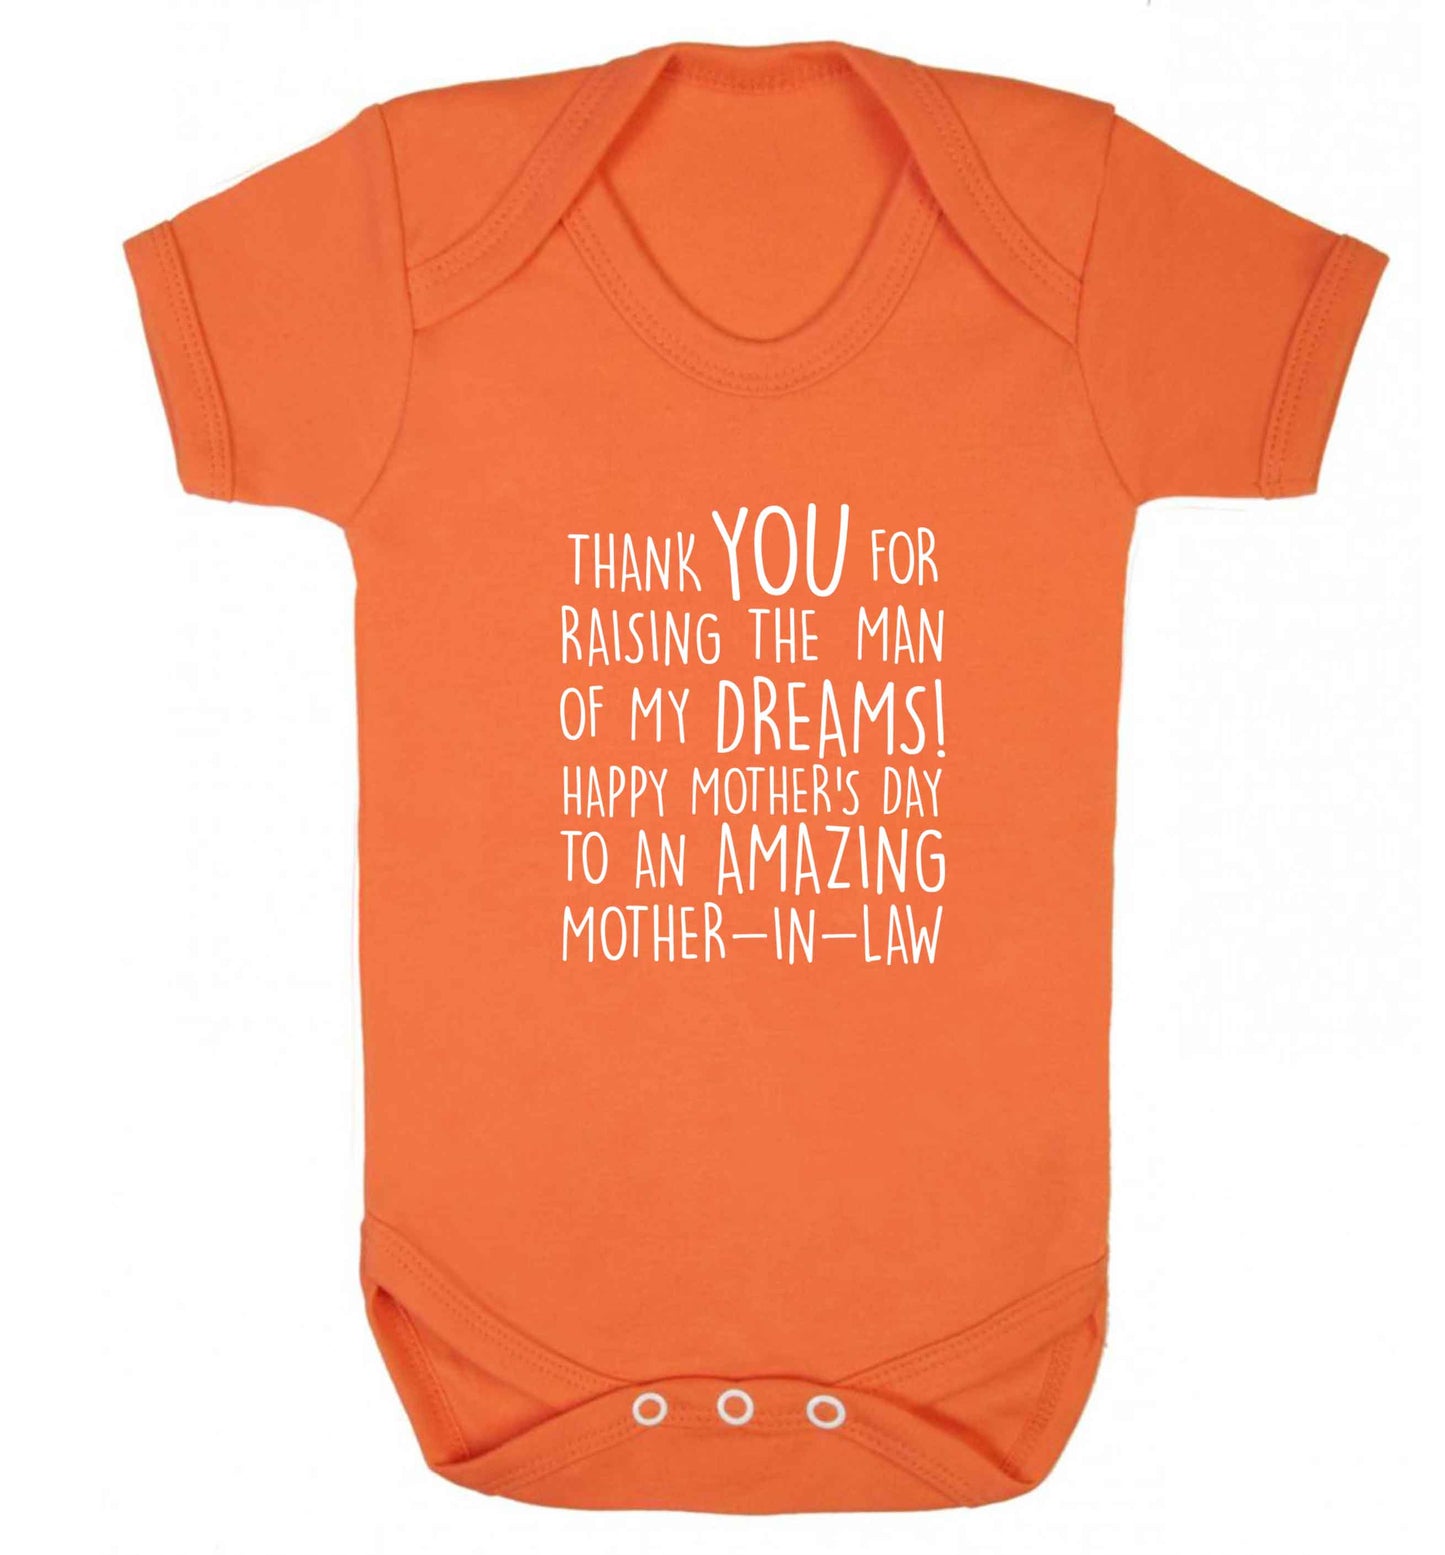 Raising the man of my dreams mother's day mother-in-law baby vest orange 18-24 months